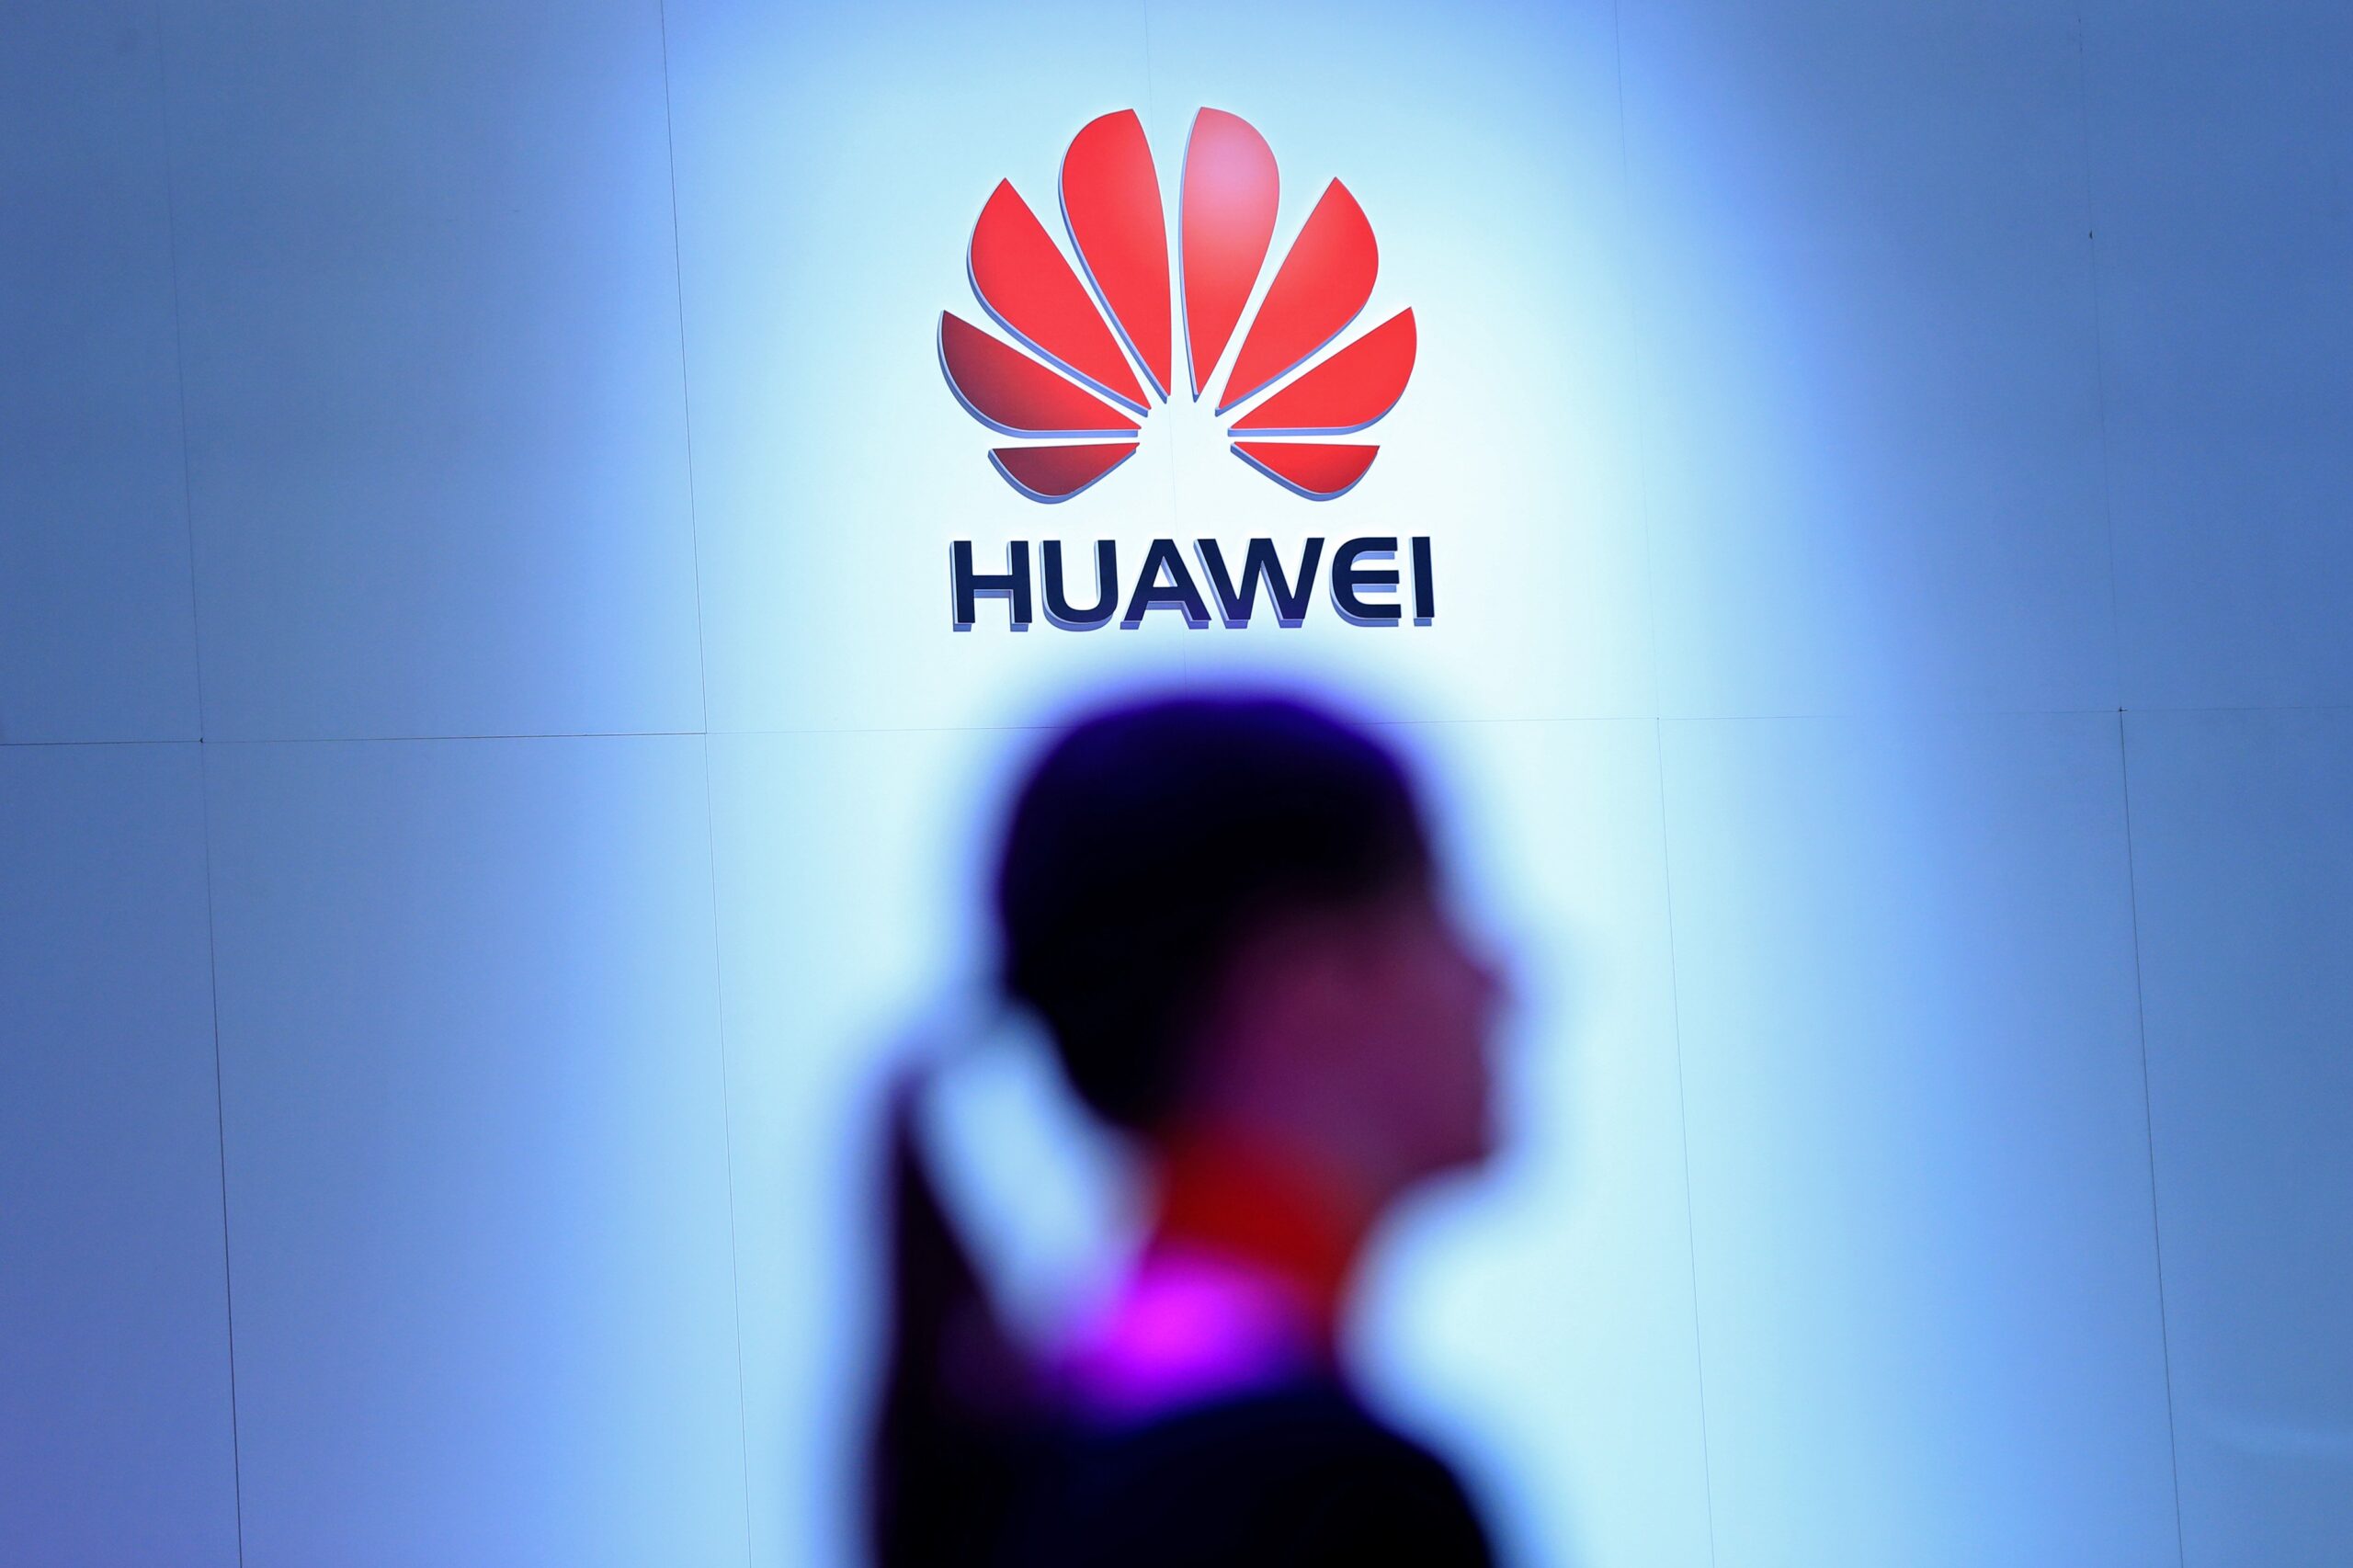 US targets Huawei and other Chinese tech brands’ employees by restricting visas